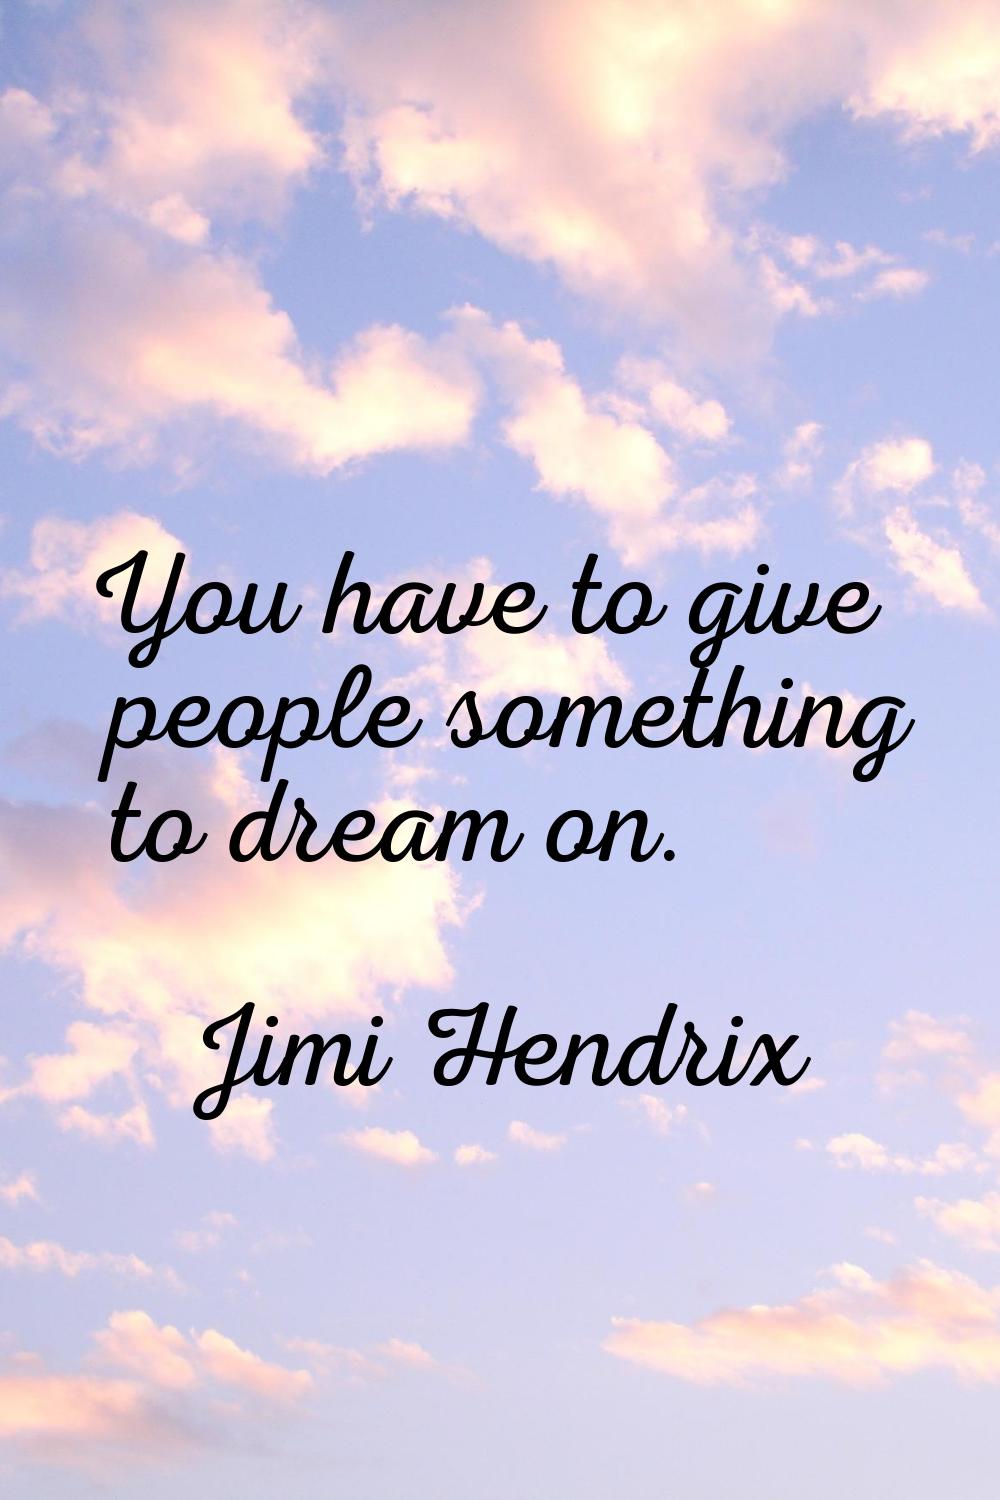 You have to give people something to dream on.